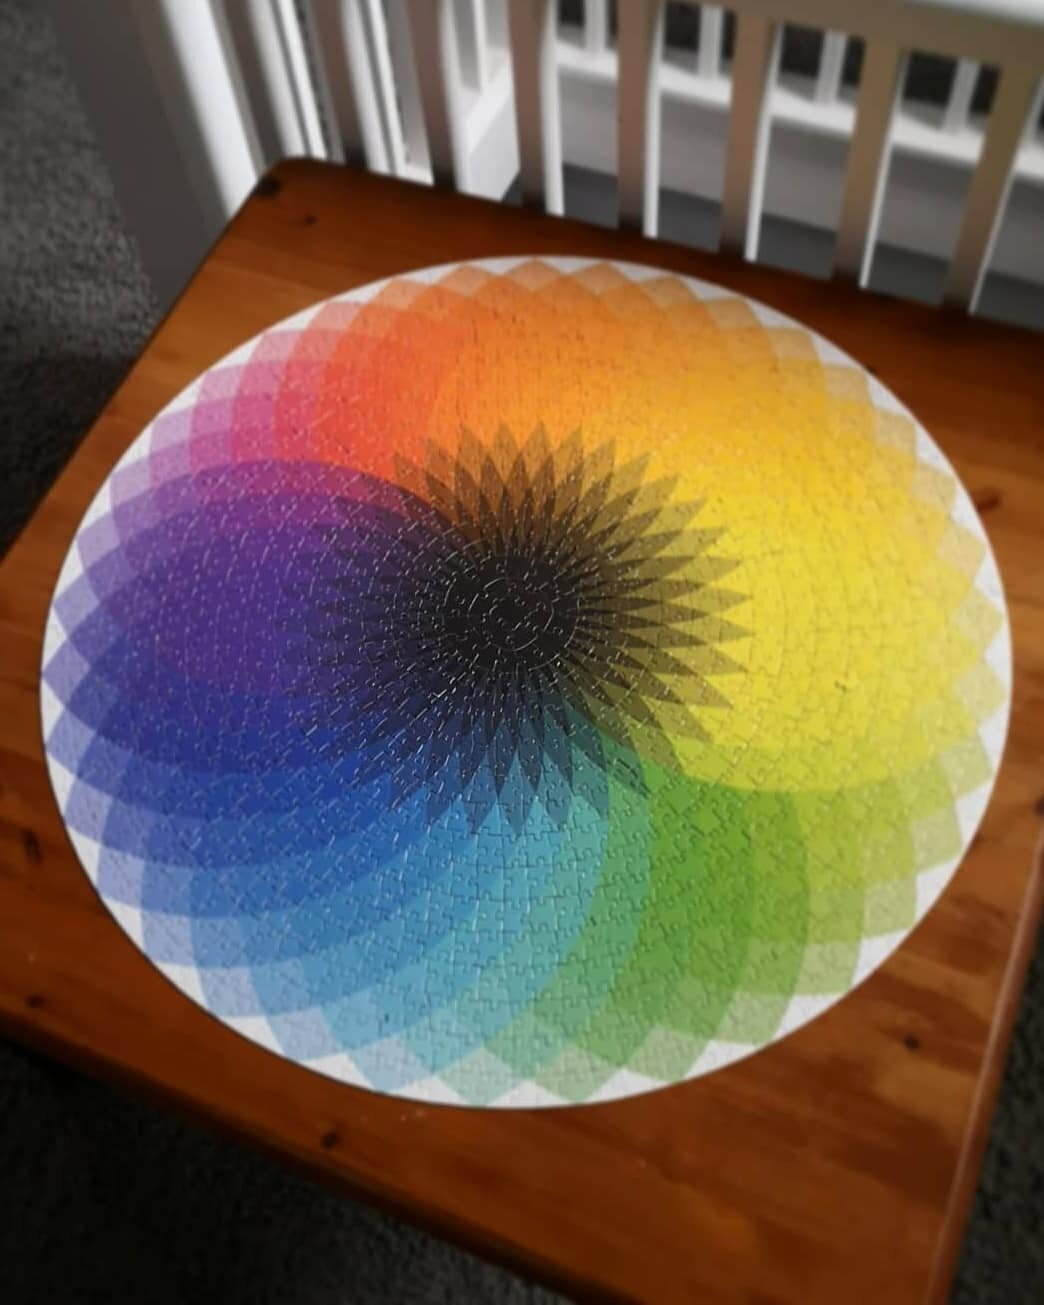 🌈 COLOUR!! Fuck yes to colour. Deep, rich, and harmonious colours. 'Non-obvious rainbows' to include a little of everything on the spectrum if possible. Use the highest chroma on the colour wheel and compliment it with nothing less than midway down.